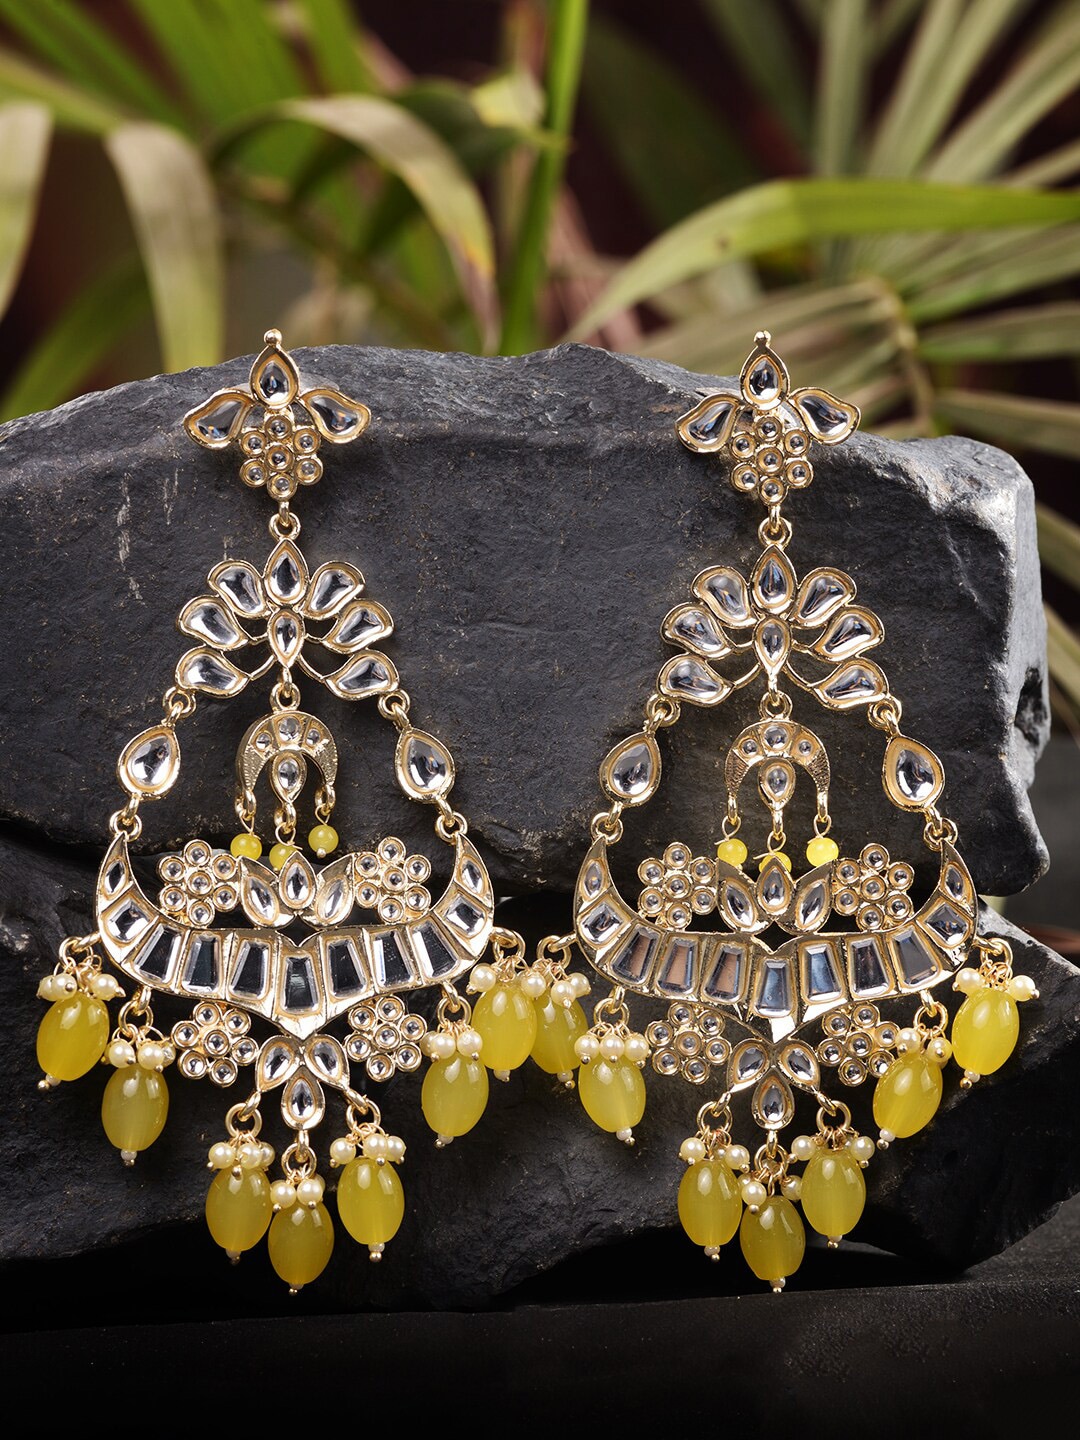 Saraf RS Jewellery Gold-Toned & Yellow Contemporary Chandbalis Earrings Price in India